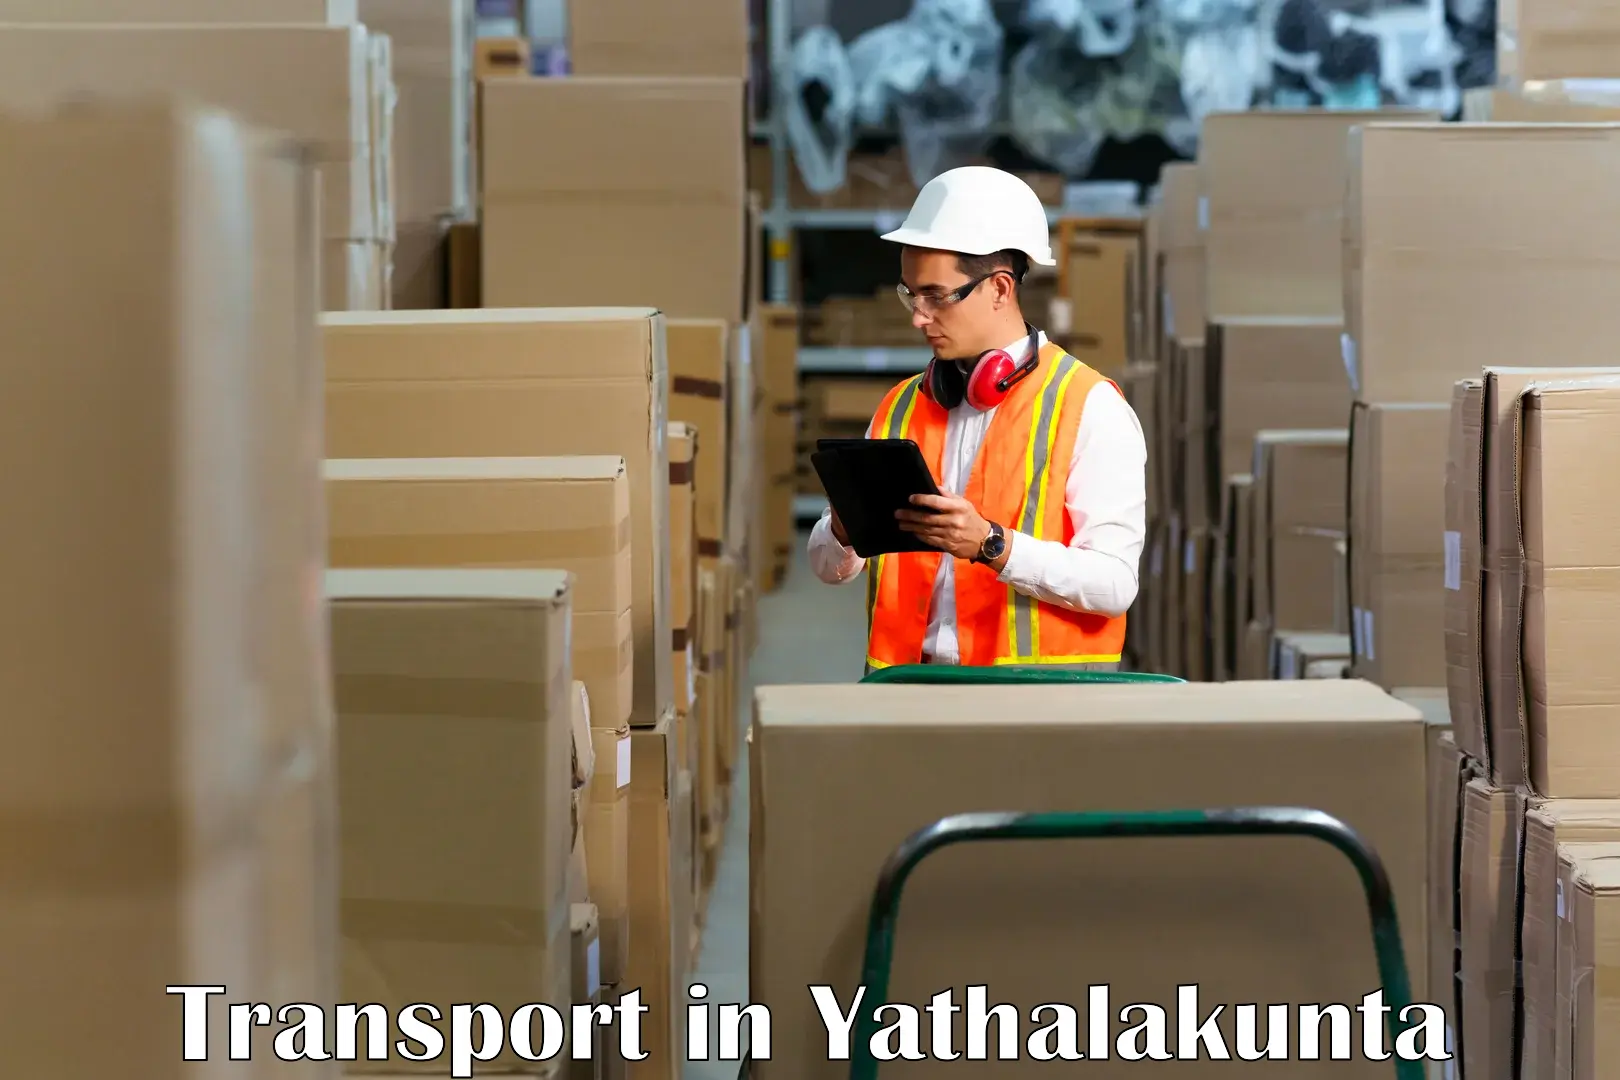 Commercial transport service in Yathalakunta